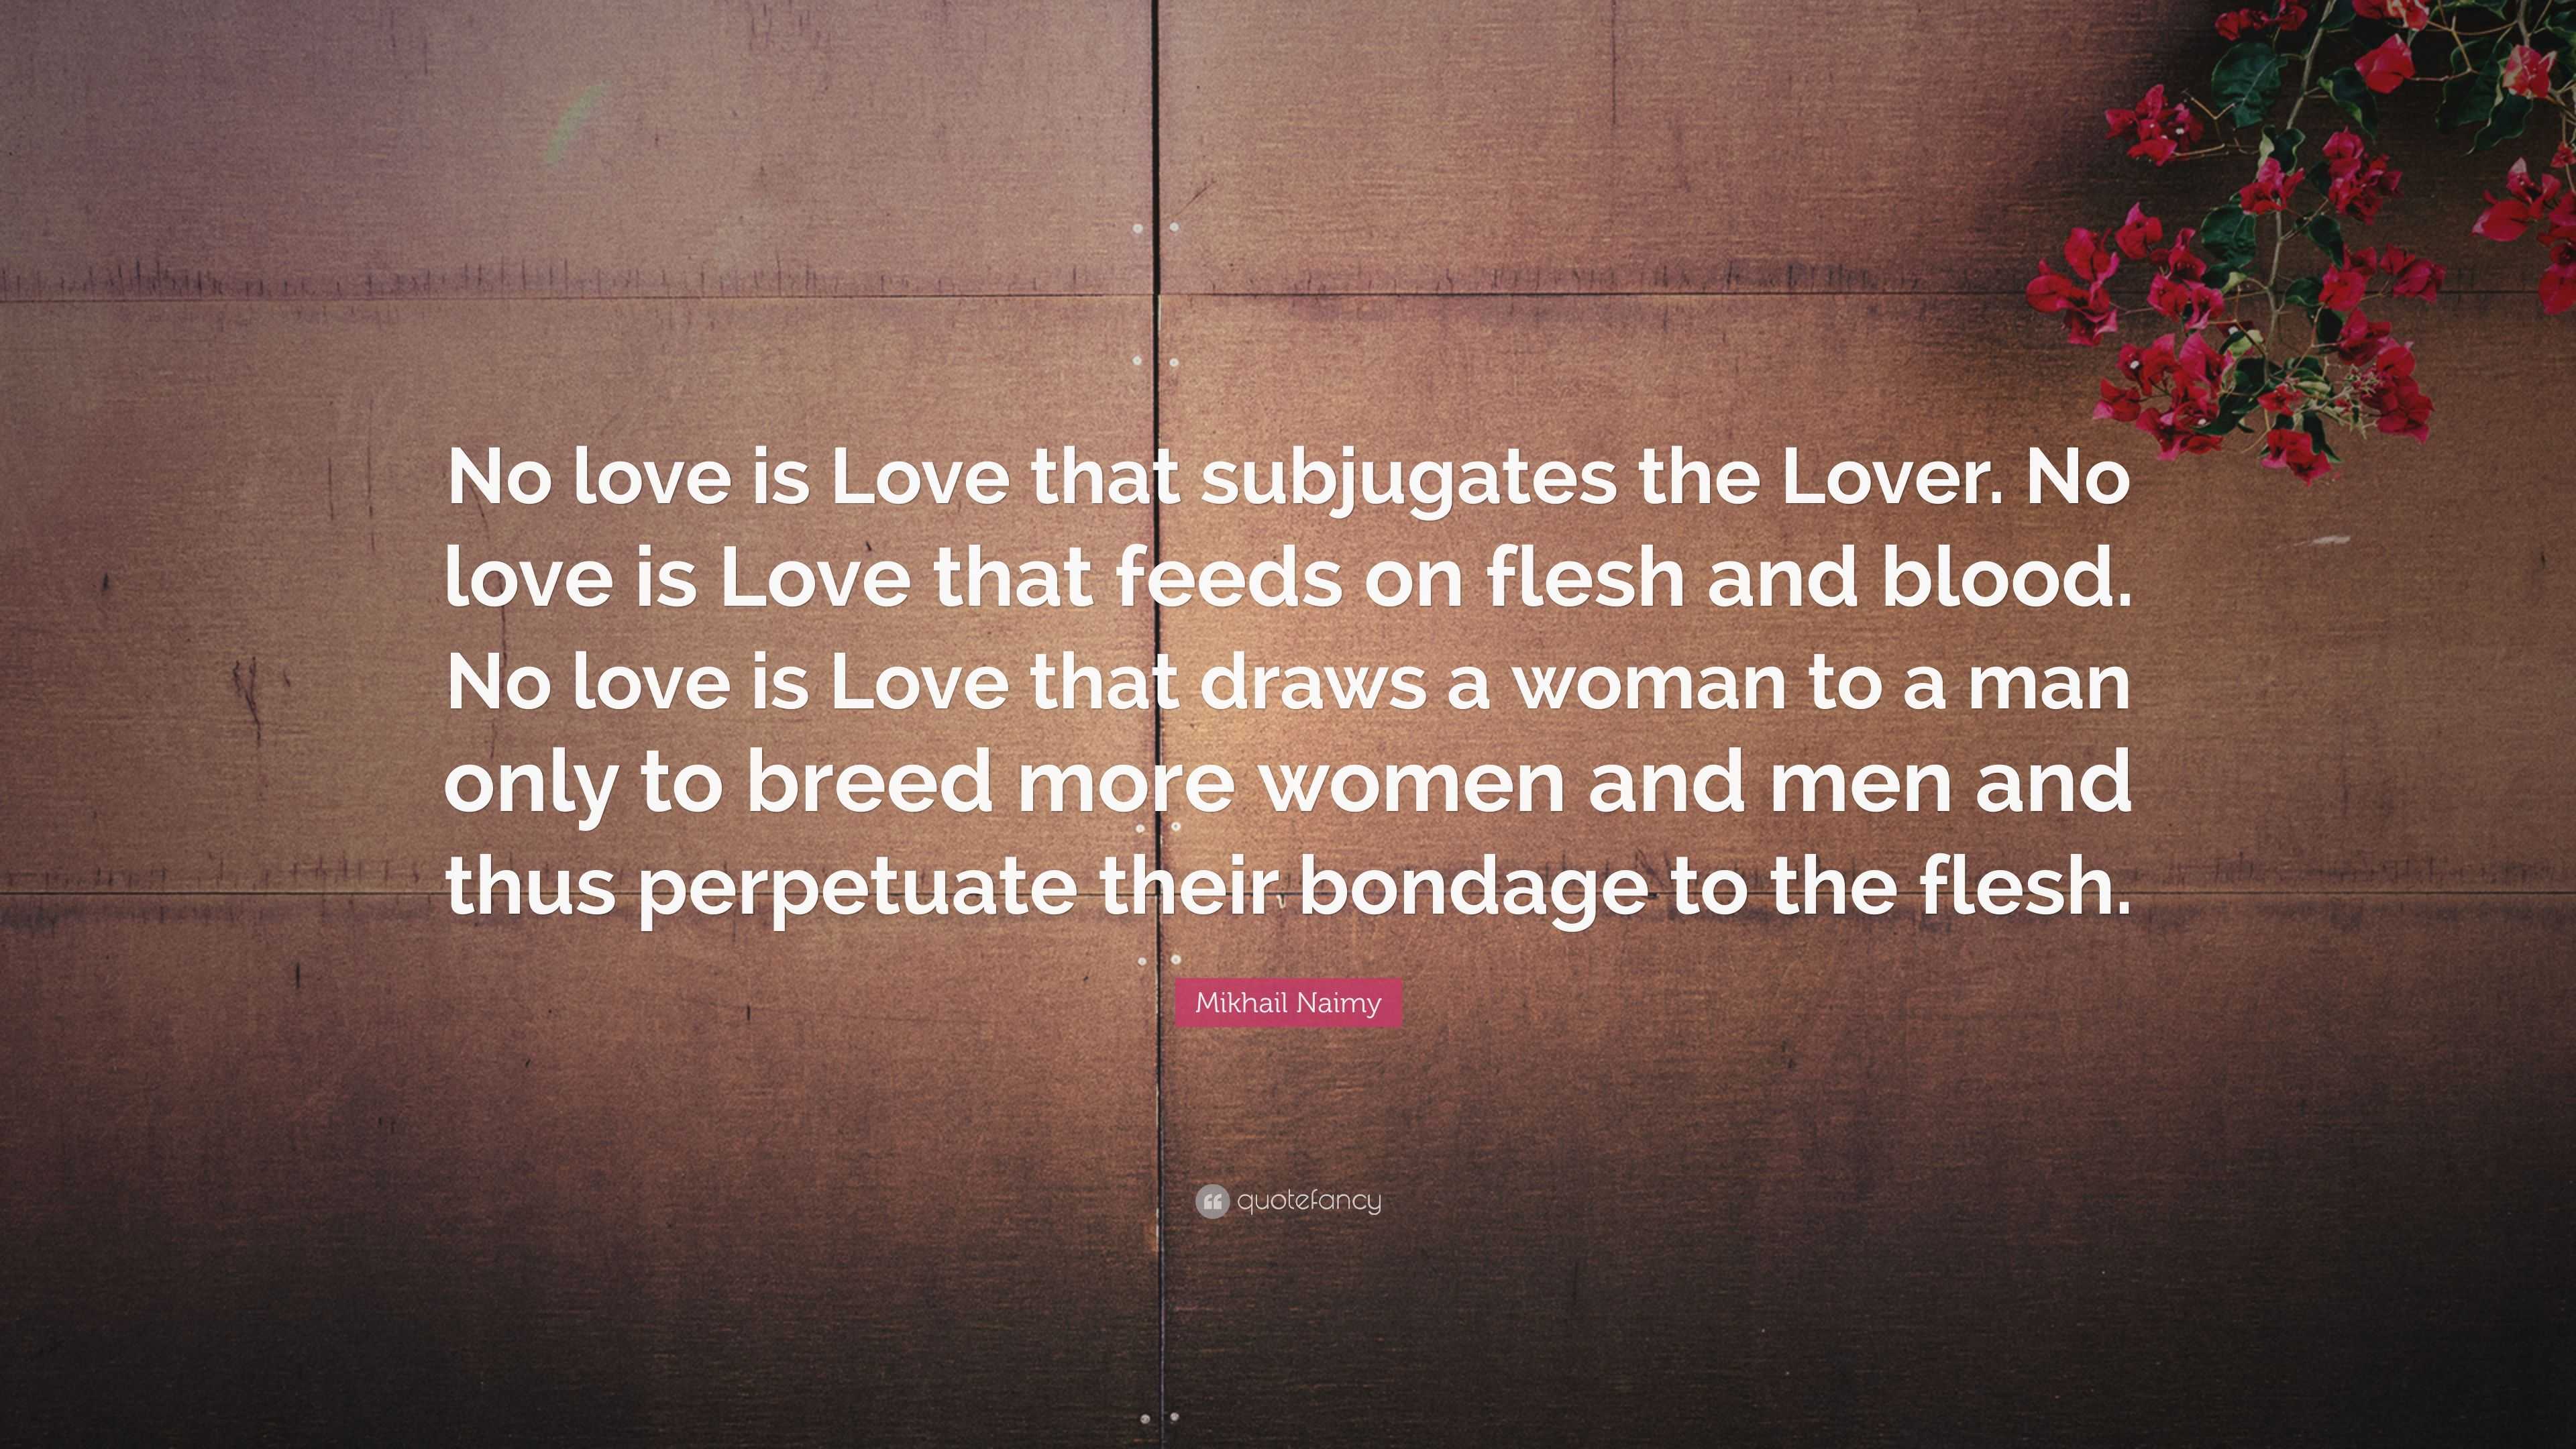 Mikhail Naimy Quote “No love is Love that subjugates the Lover No love